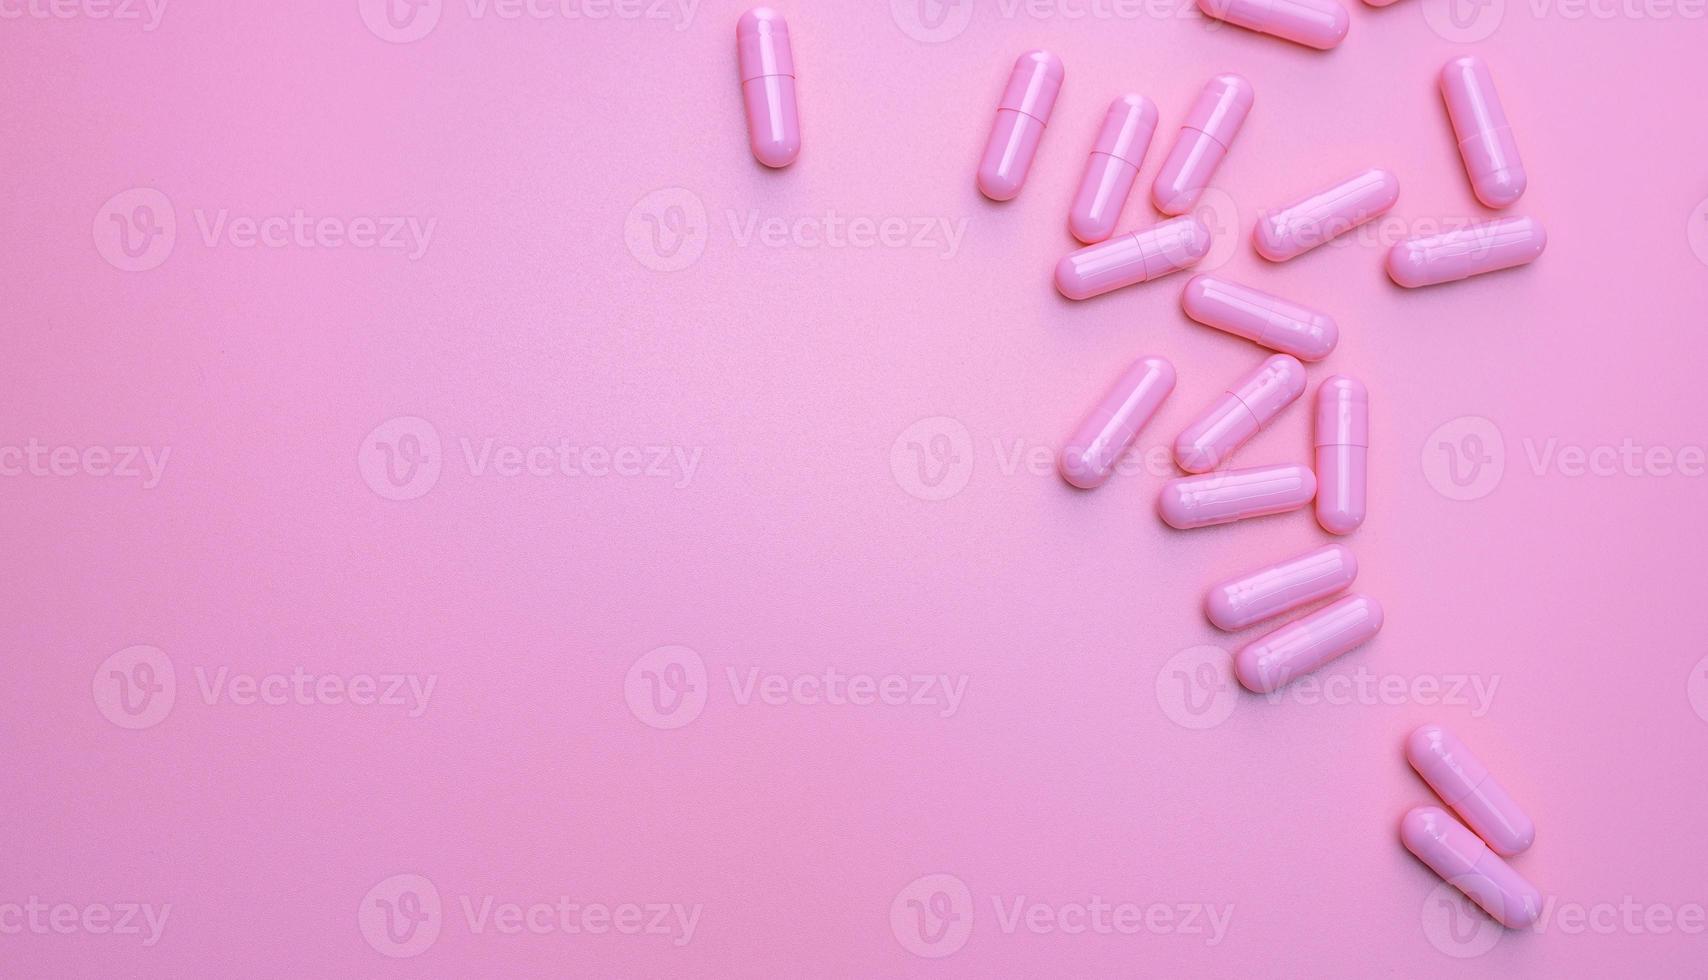 Pink antibiotic capsule pills spread on pink background. Antibiotic drug resistance. Pharmaceutical industry. Healthcare and medicine concept. Health budget concept. Capsule manufacturing industry. photo